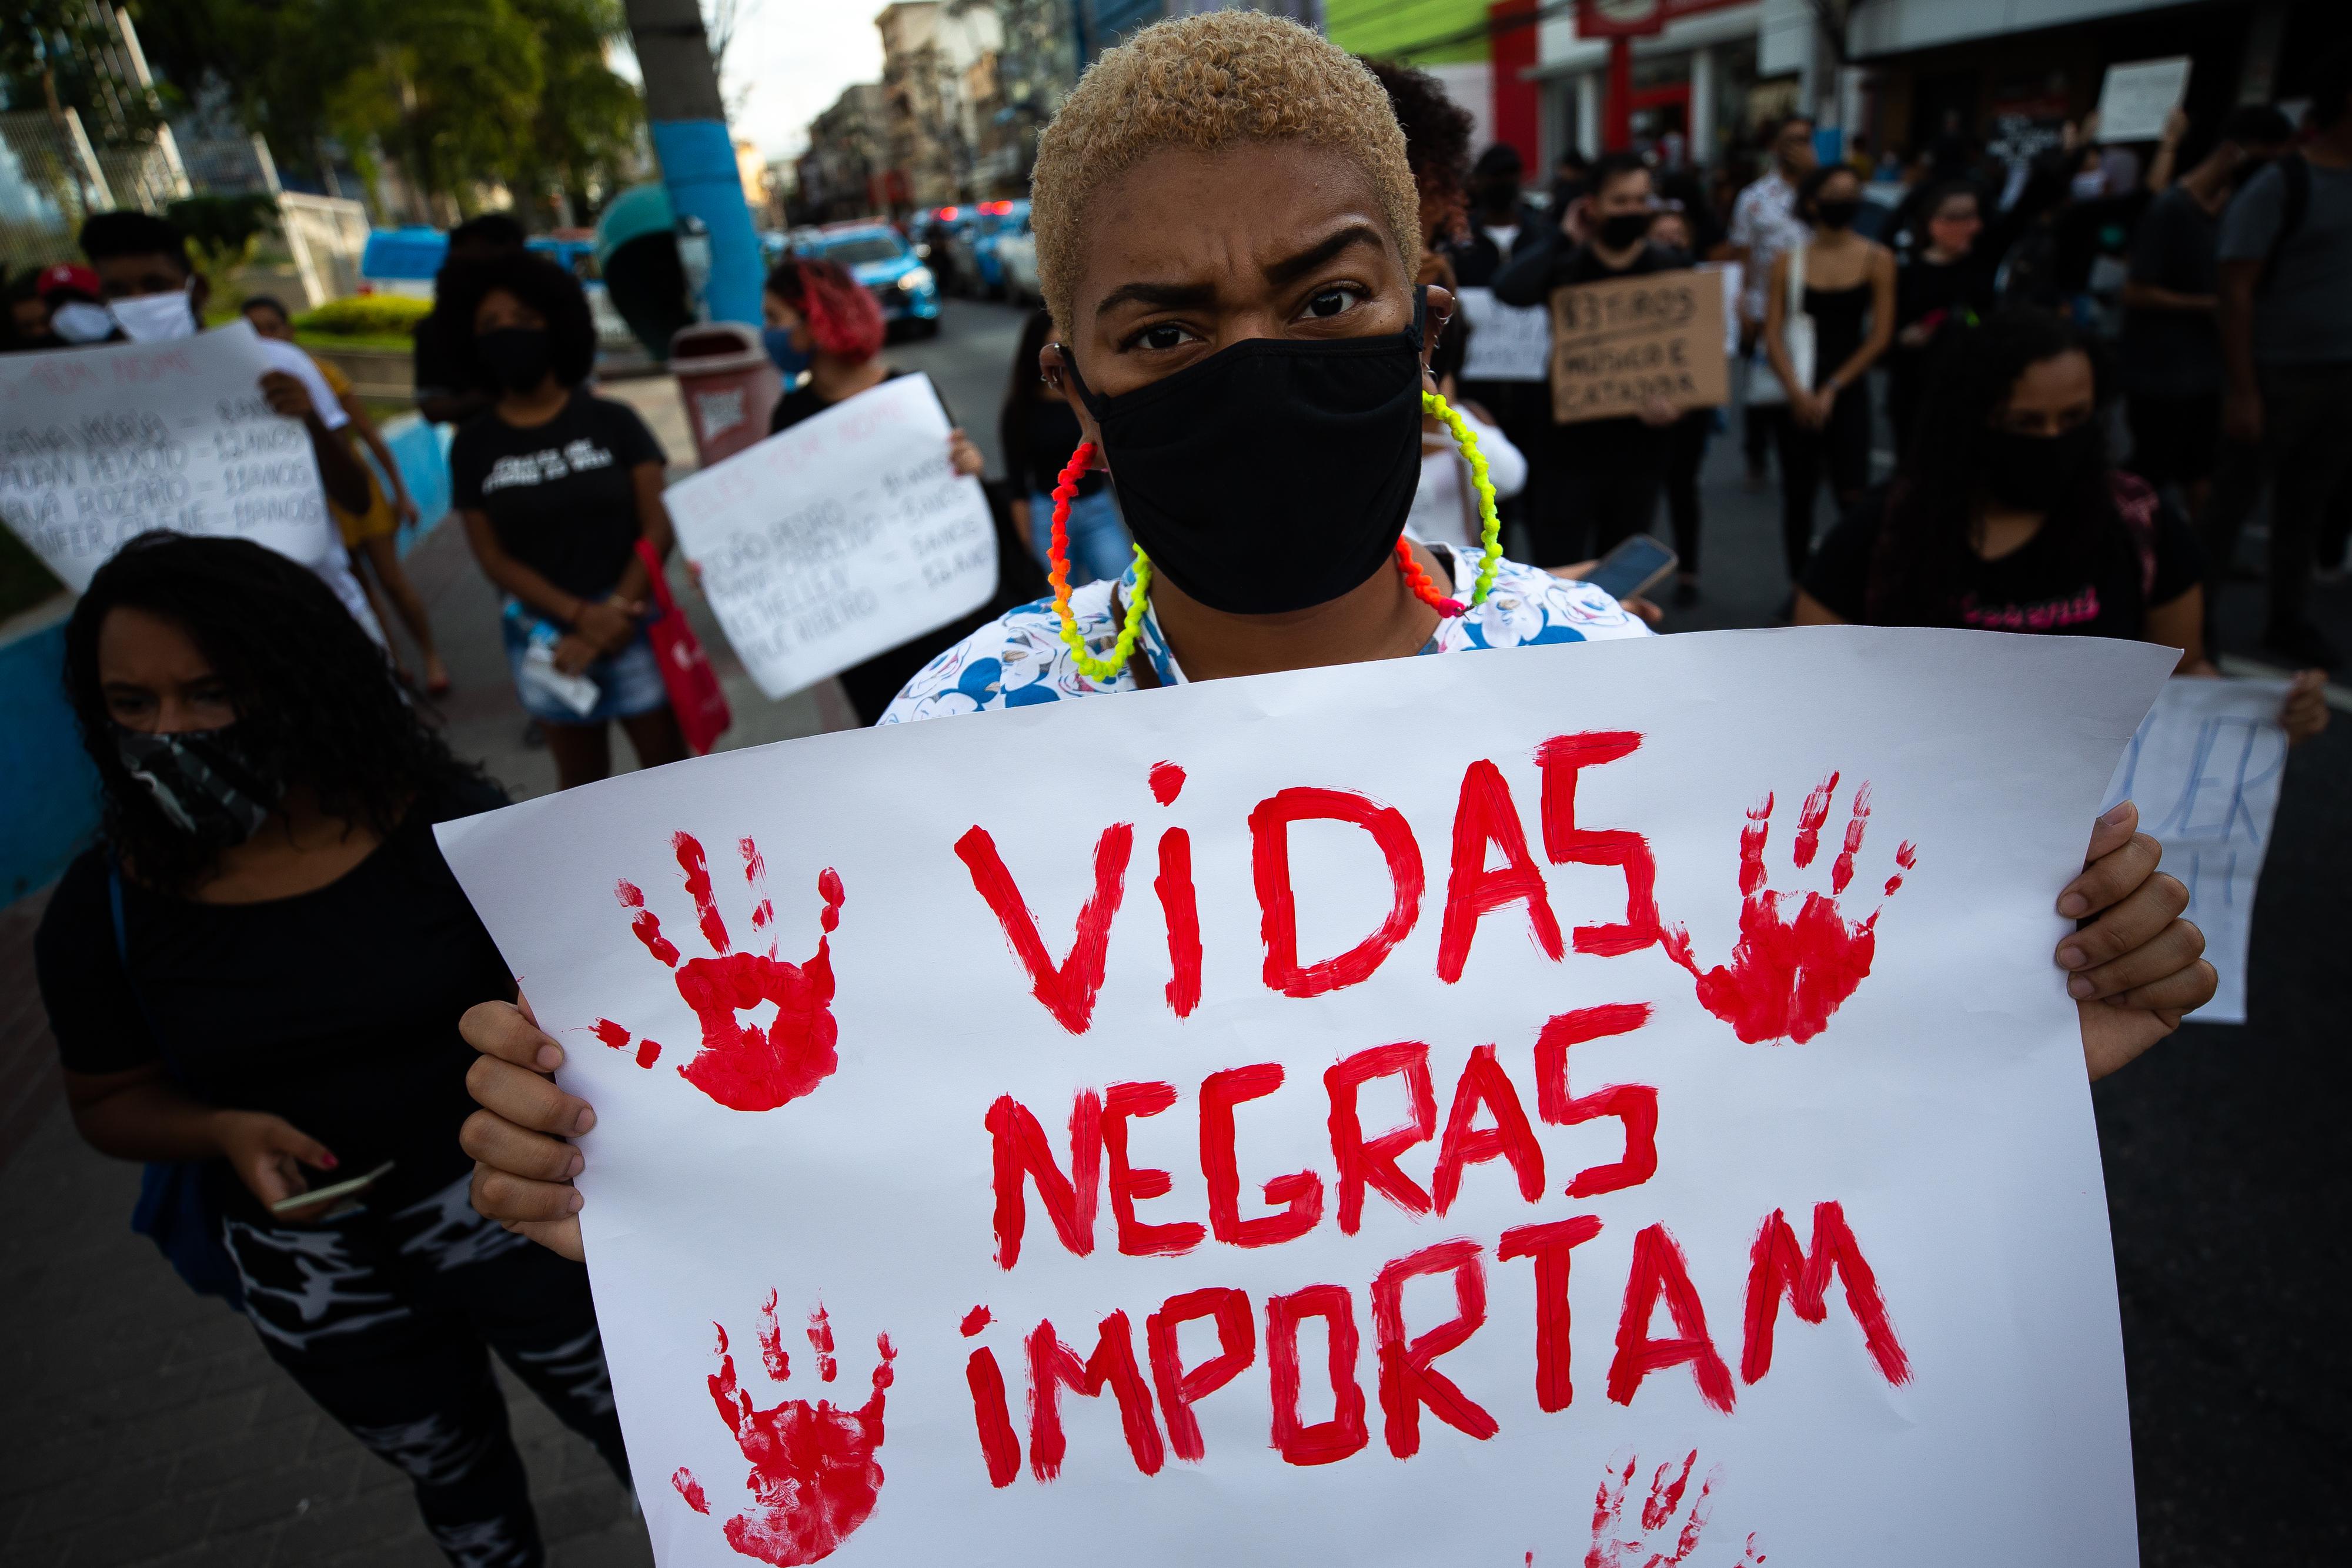 A woman in a mask holds a red-painted sign reading "Black Lives Matter" in Portuguese at a rally.